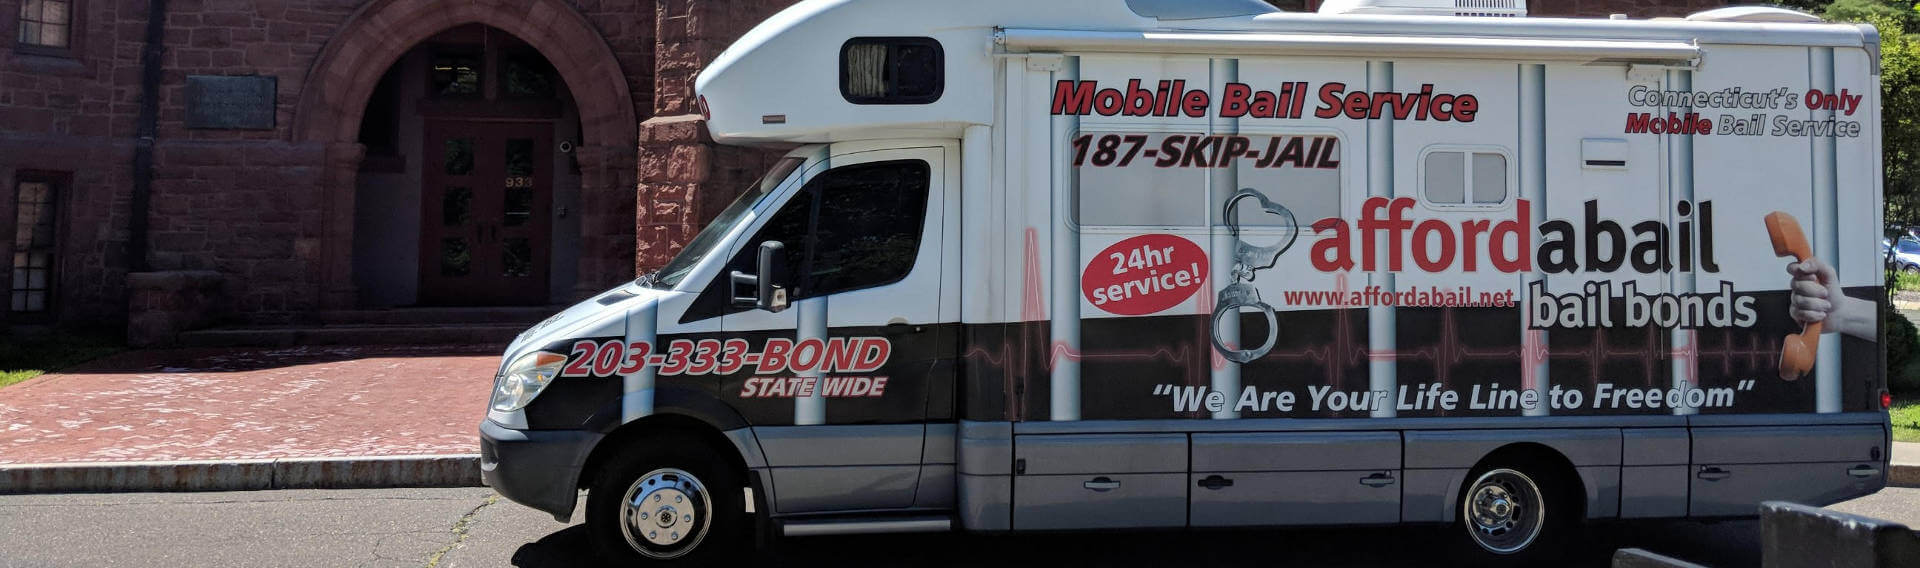 Mobile bail bonds service in New Haven CT